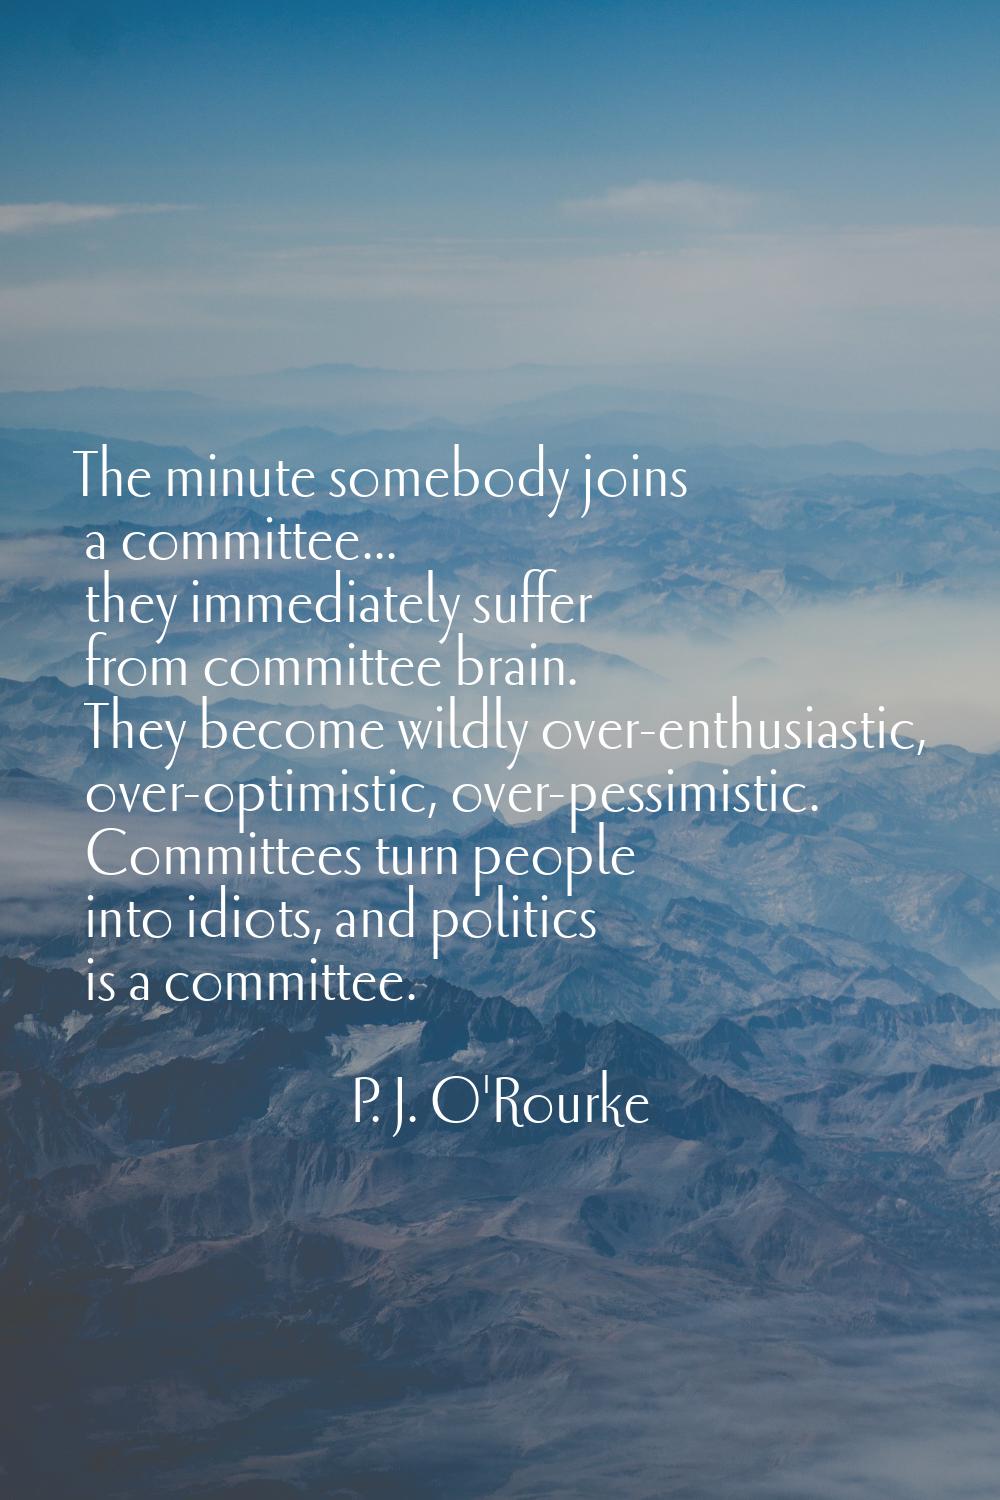 The minute somebody joins a committee... they immediately suffer from committee brain. They become 